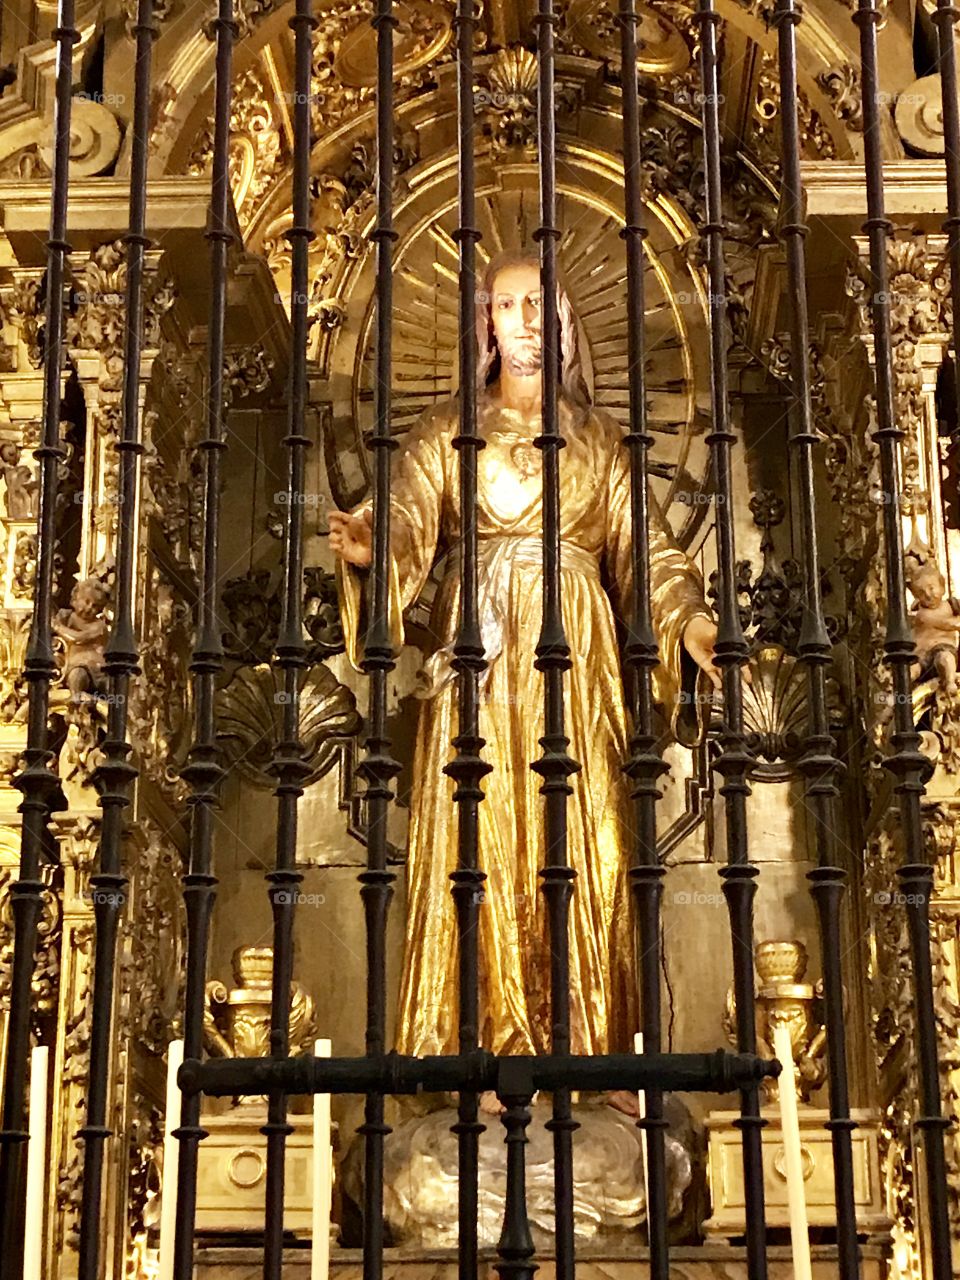 This statue of Christ in the Cathedral in Spain adorned with gold, so ornate, so finely constructed!